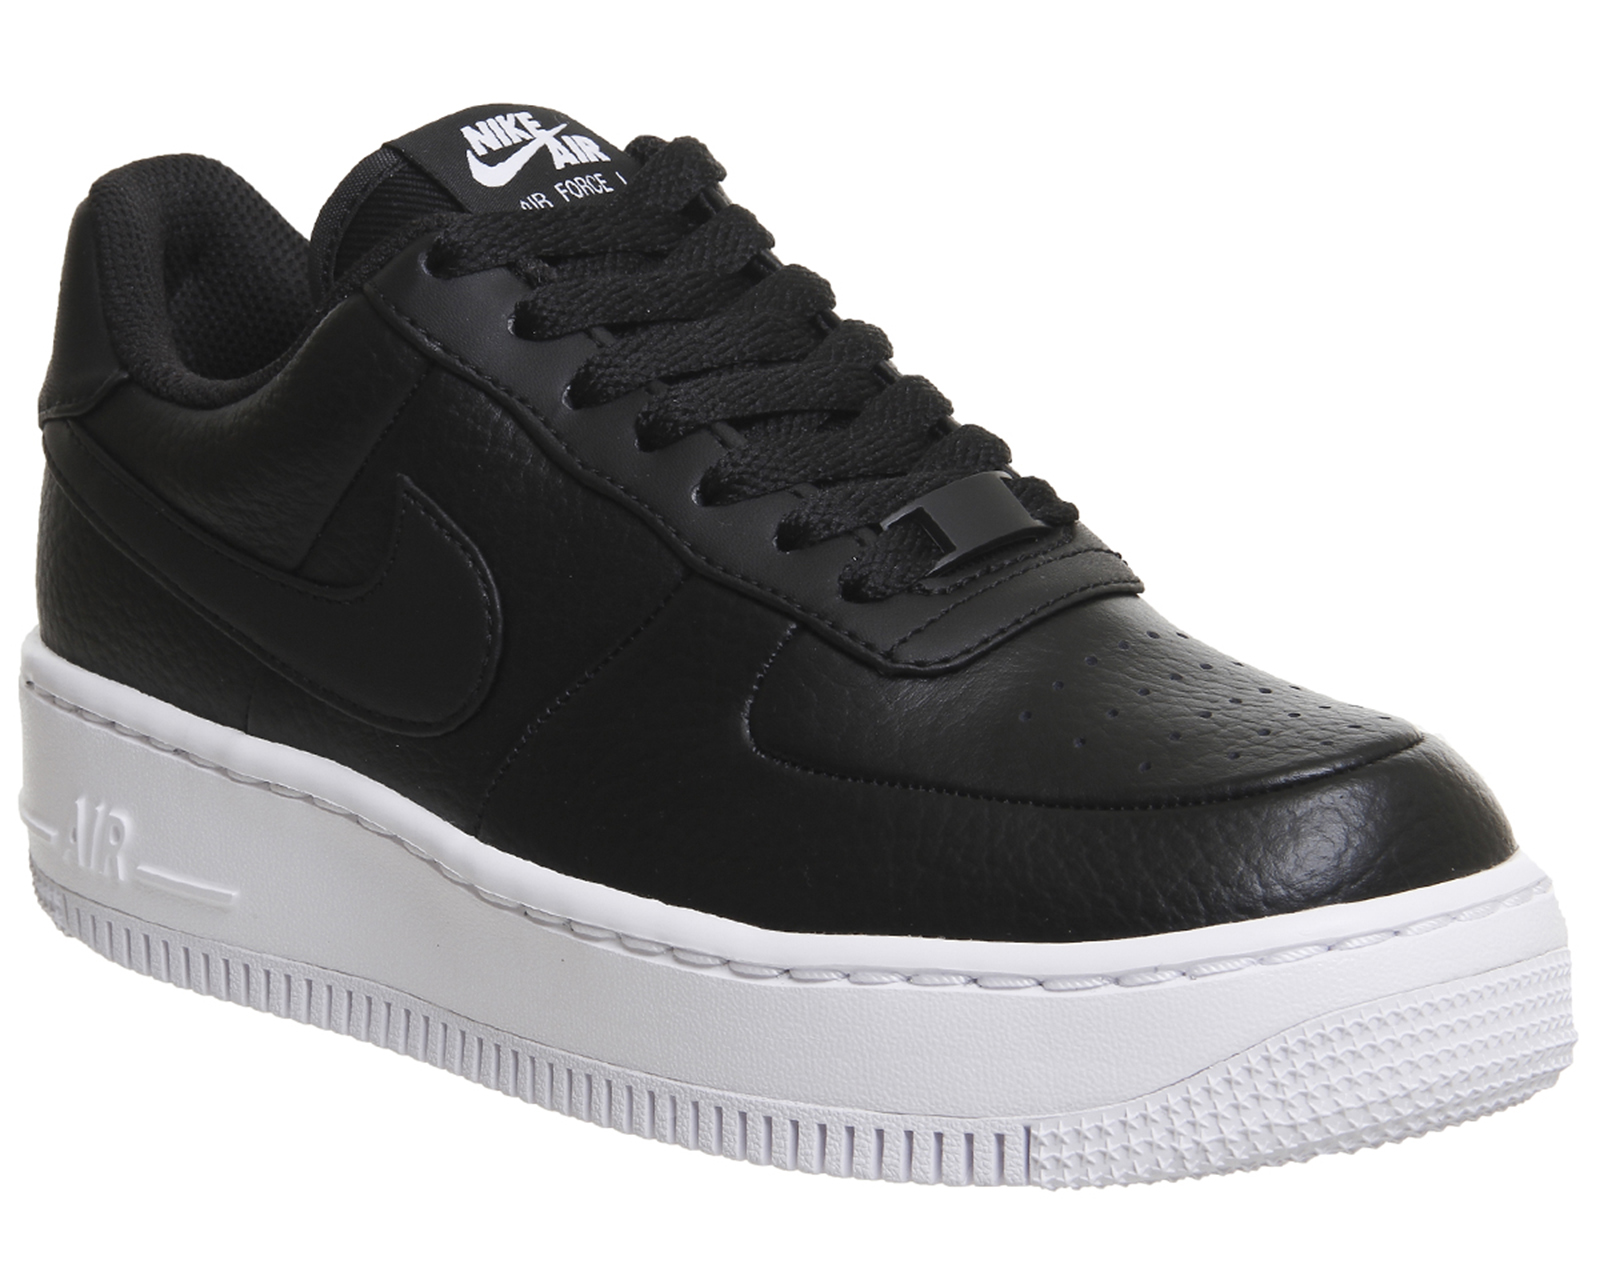 Nike Air Force 1 Upstep Trainers Black White - Hers trainers